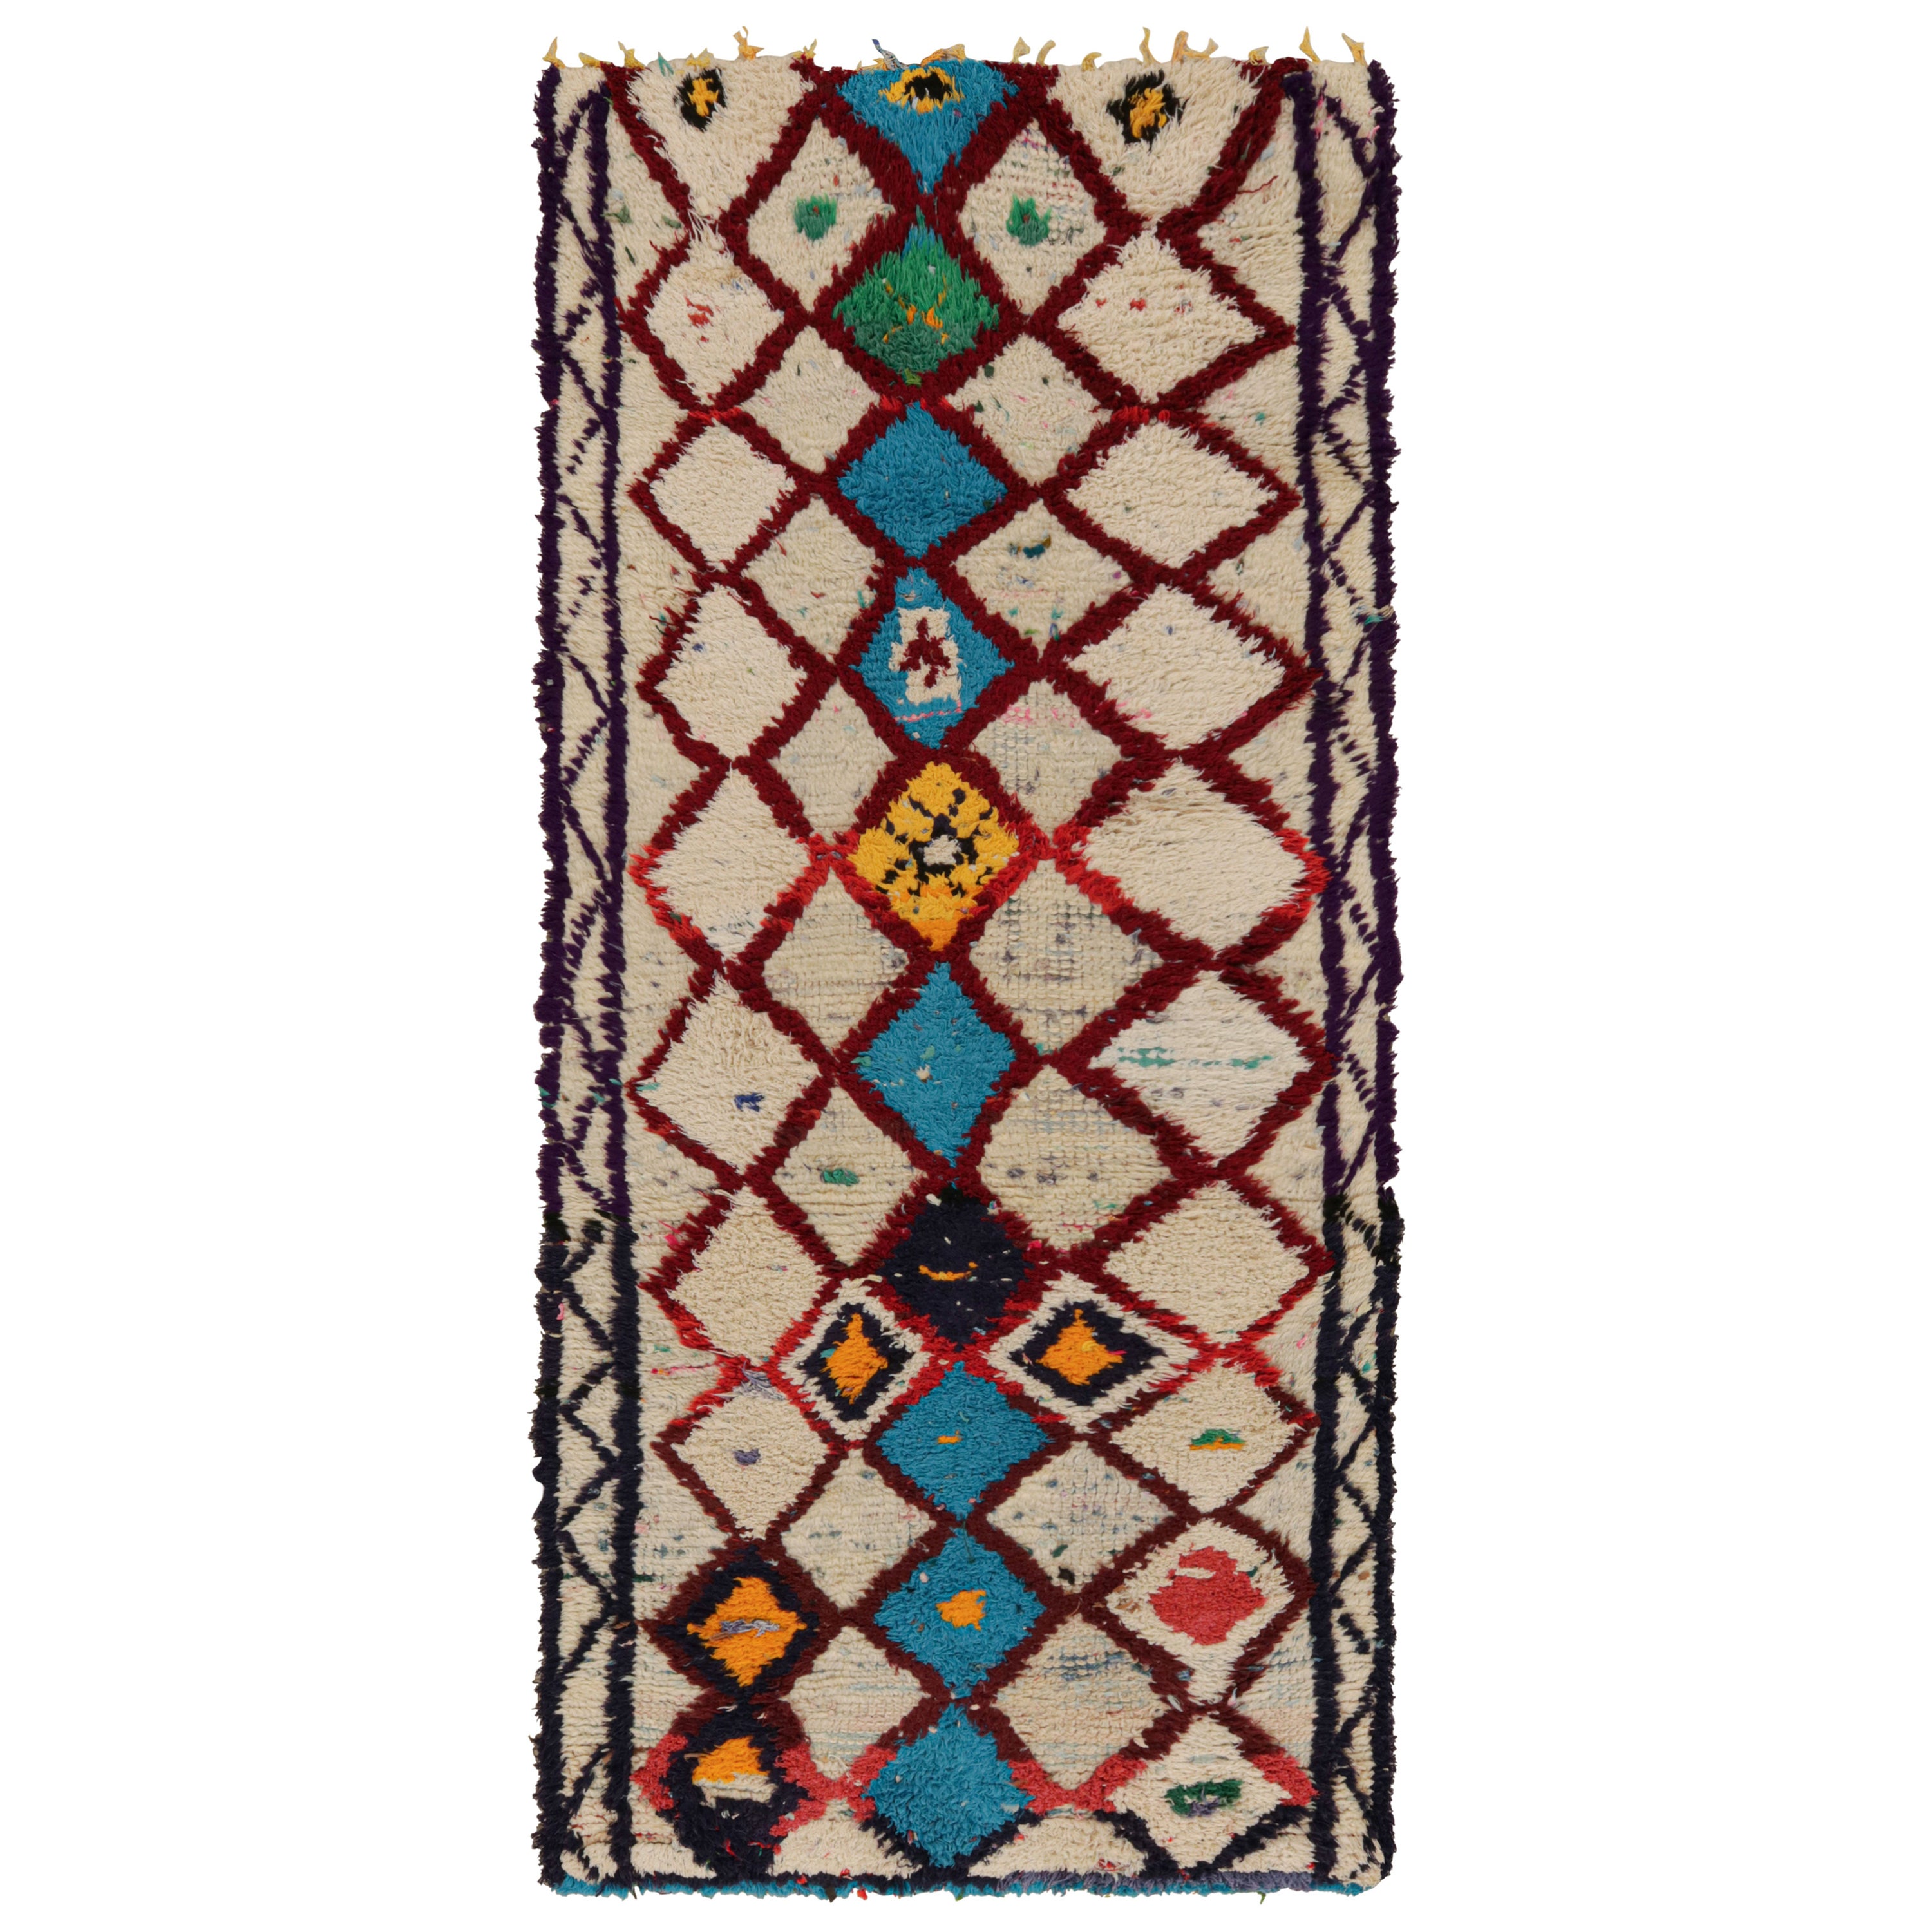 Vintage Moroccan Runner Rug with Colorful Diamond Patterns, from Rug & Kilim  For Sale